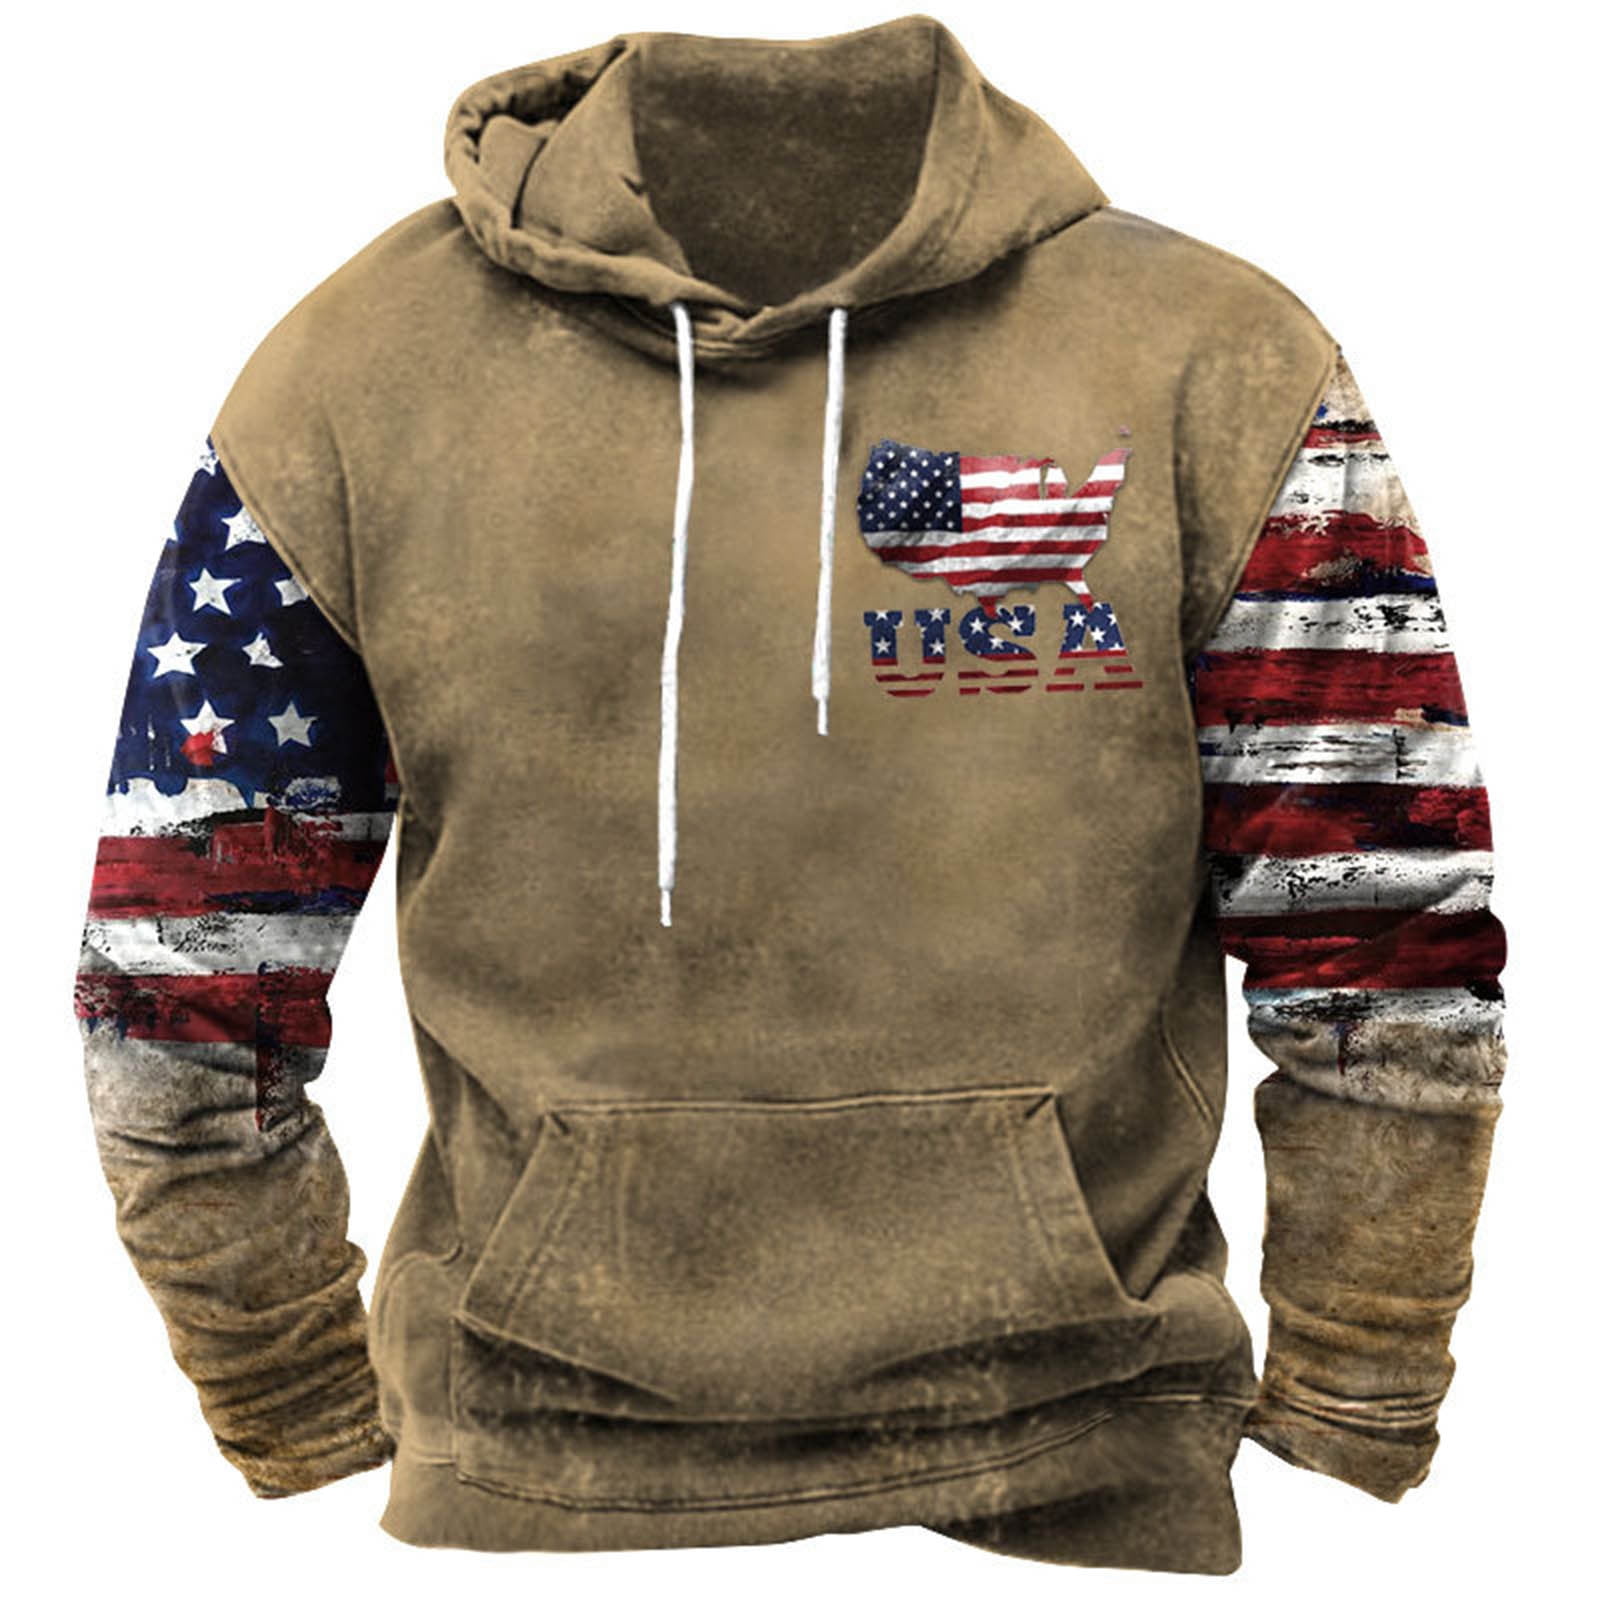 Hoodies for Men,Mens Hoodies Patchwork Pullover Solid Color Block Big and  Tall Sweatshirts Drawstring Tops with Pockets mens hoodies pullover men's  novelty hoodies